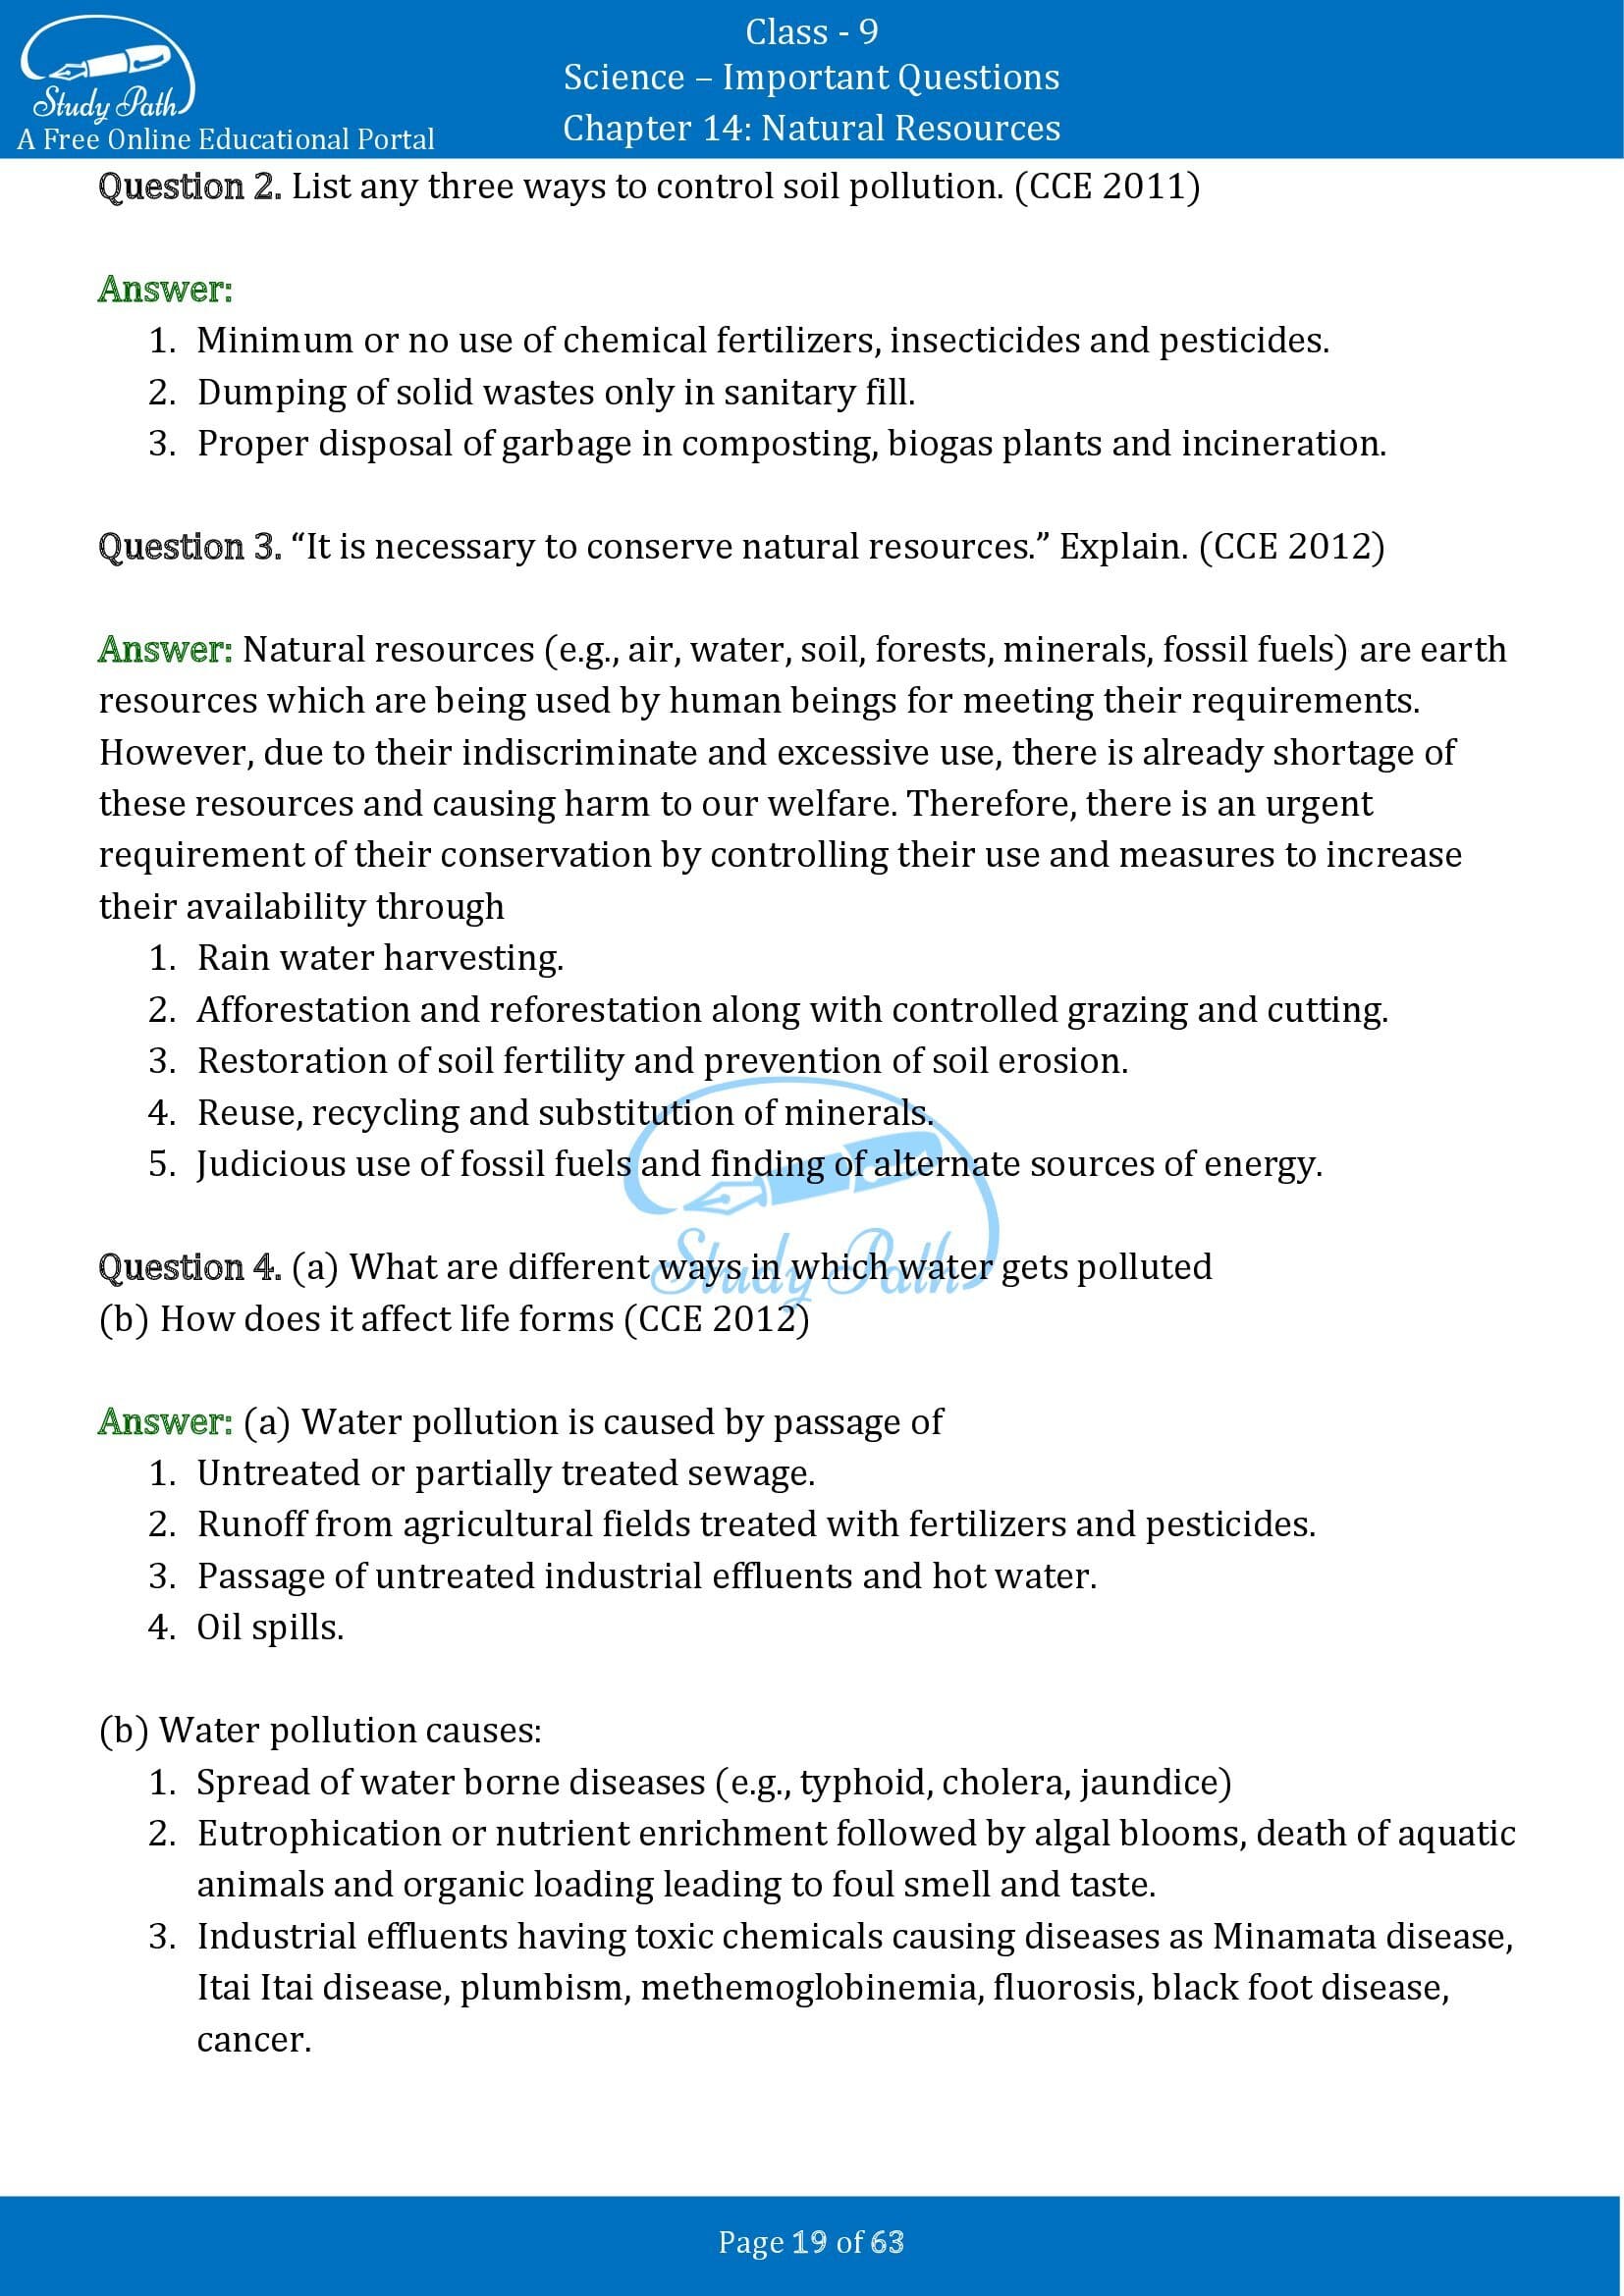 Important Questions for Class 9 Science Chapter 14 Natural Resources 00019